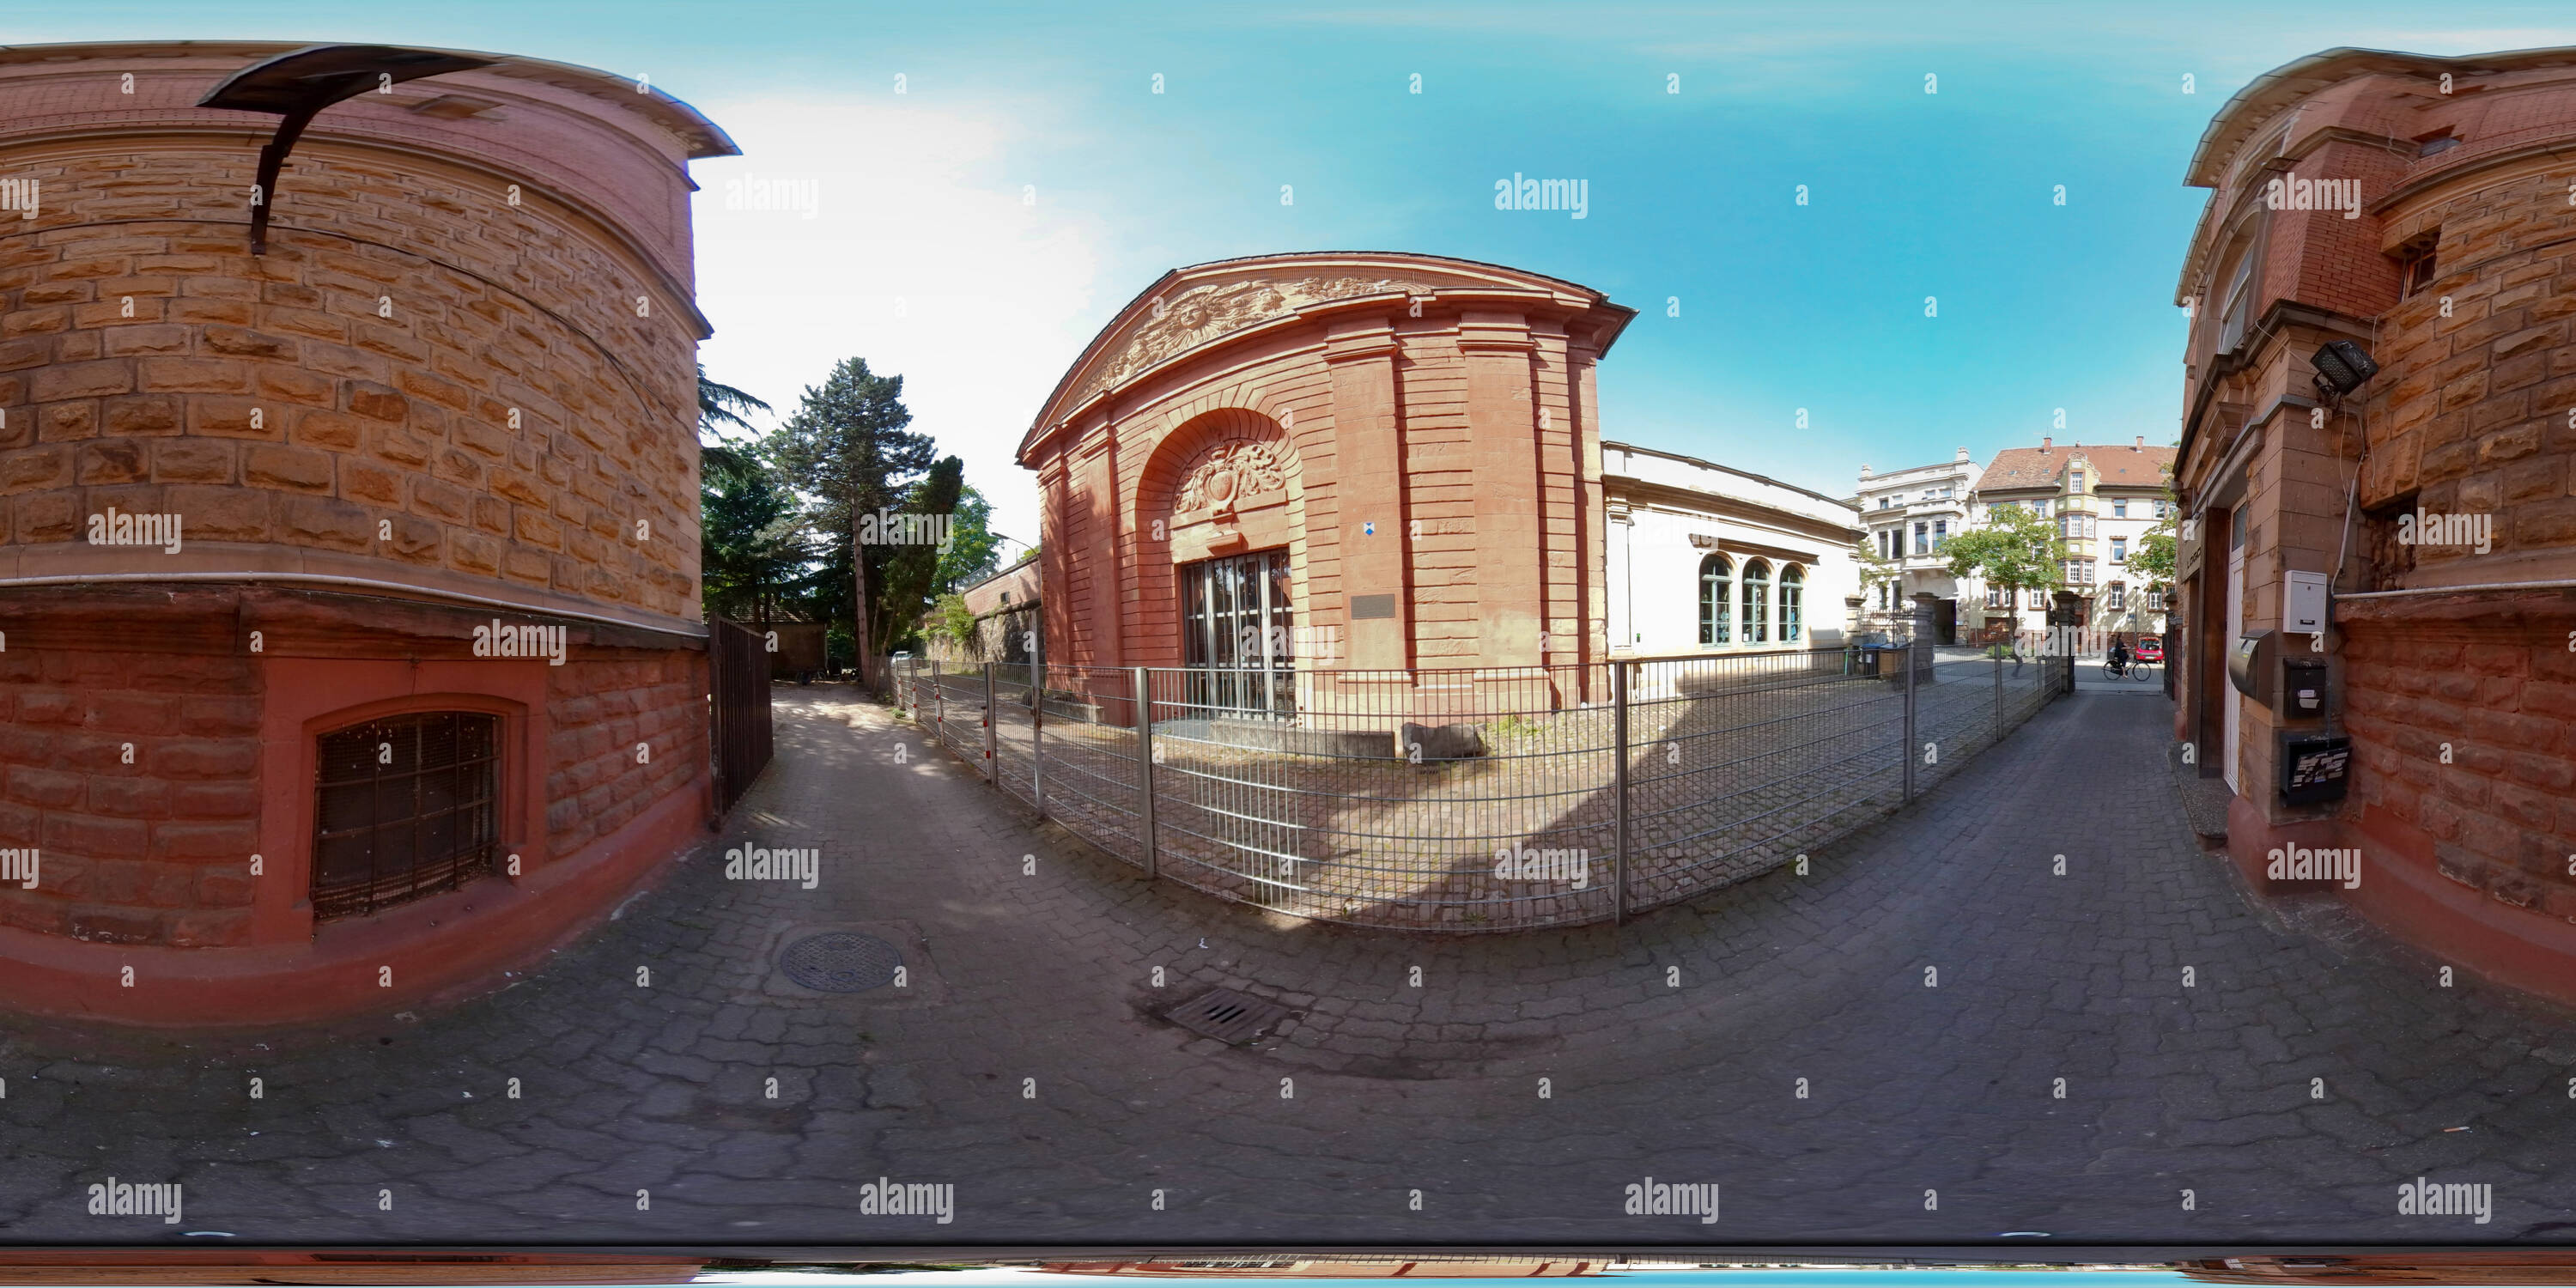 360 degree panoramic view of French Gate (Französisches Tor), Landau, 2018-05